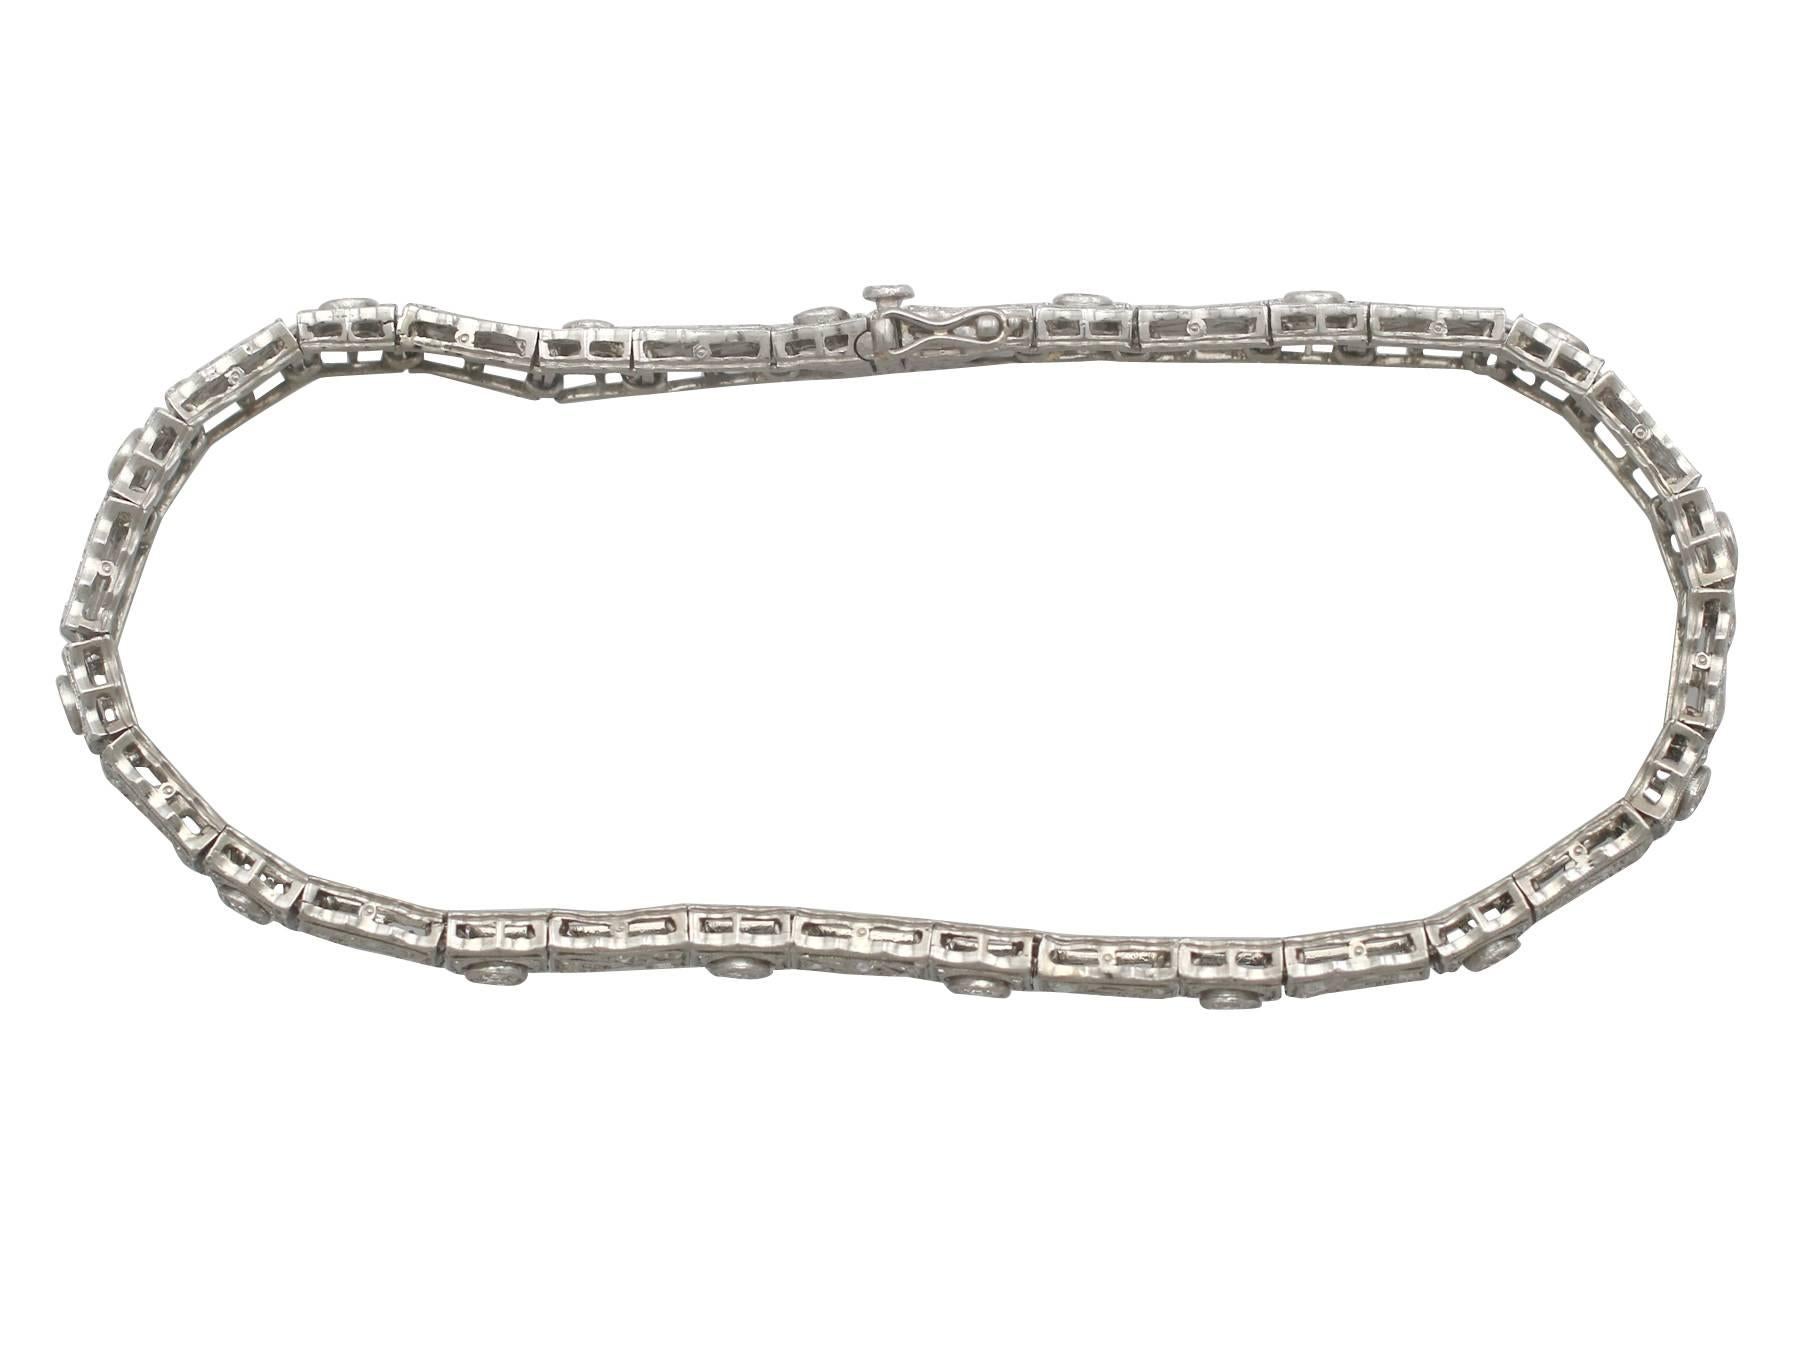 A fine and impressive Art Deco 1.02 carat diamond and 14 karat white gold line bracelet; part of our diverse antique jewelry and estate jewelry collections

This fine and impressive Art Deco diamond bracelet has been crafted in 14k white gold.

The